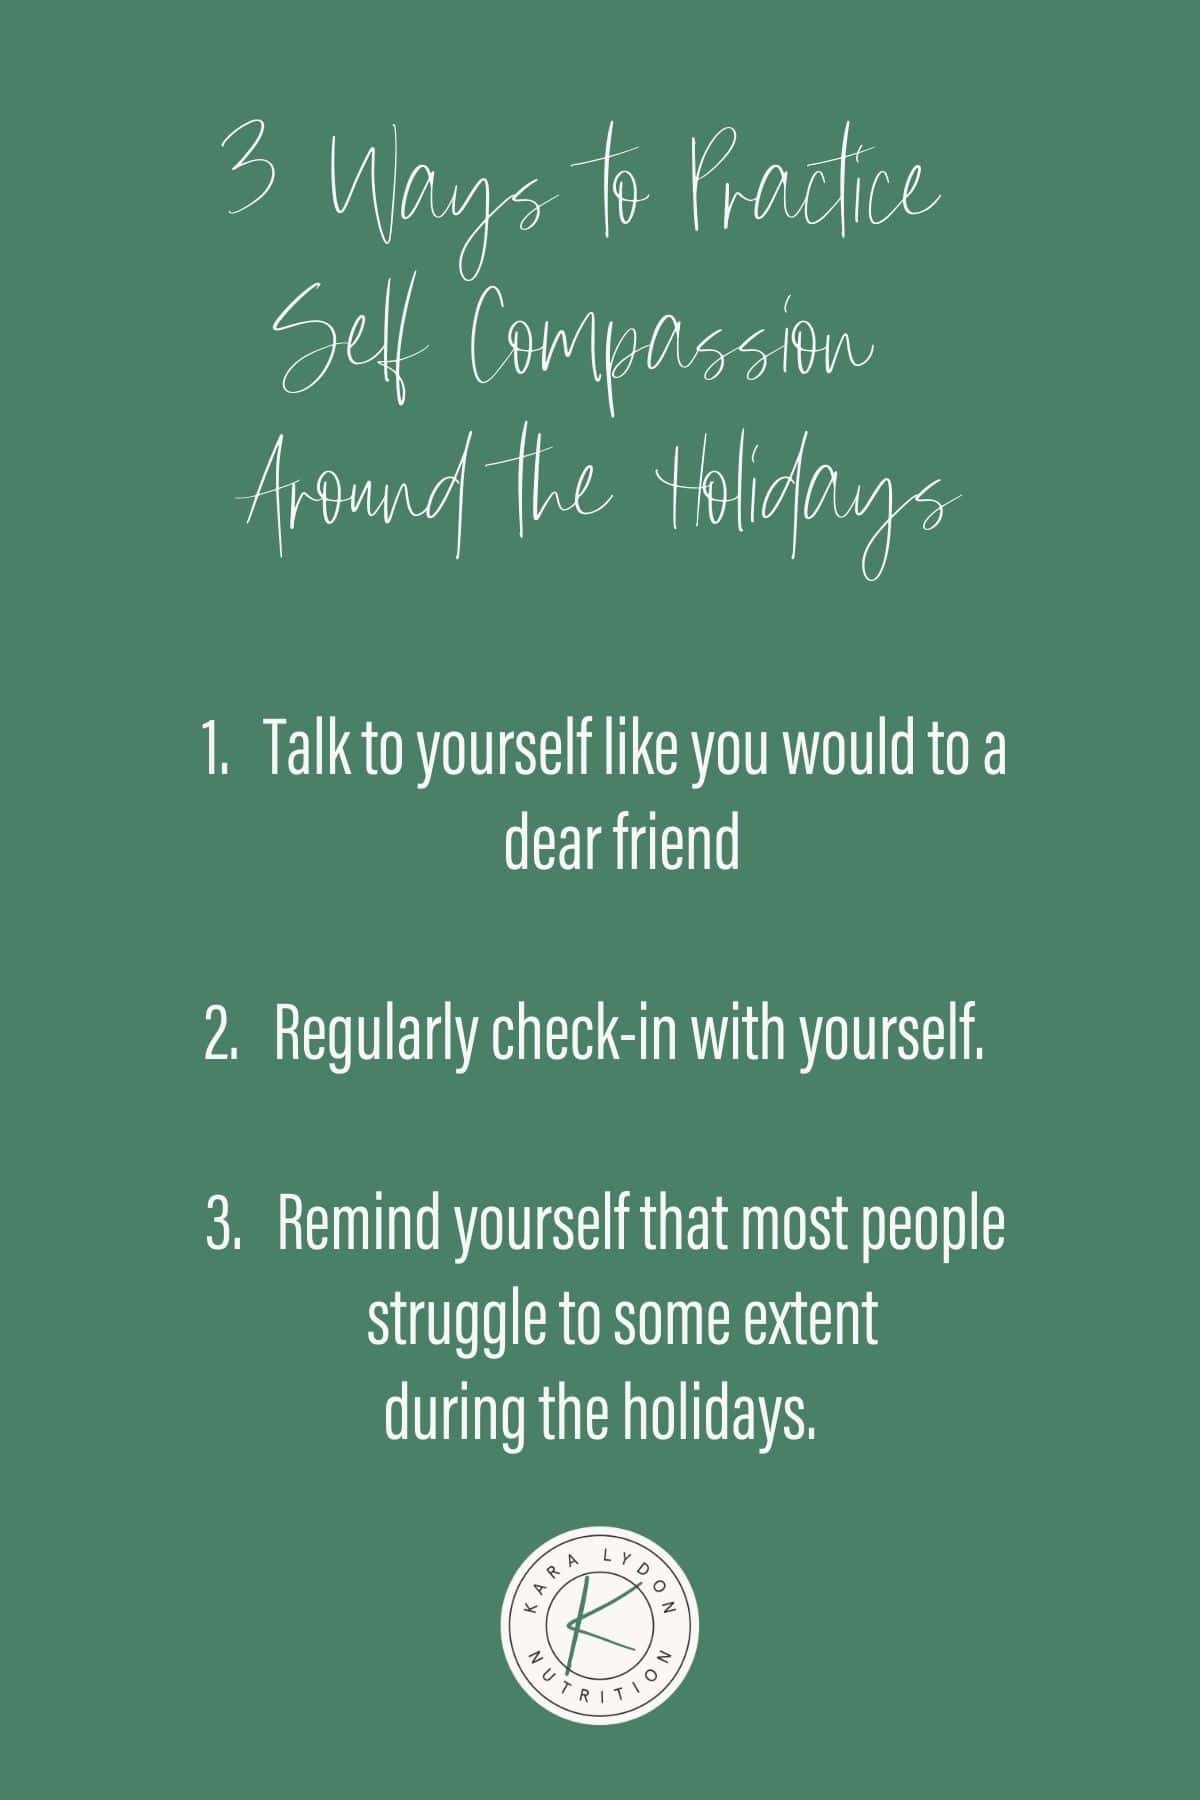 Graphic list of 3 ways to practice self-compassion during the holidays. 